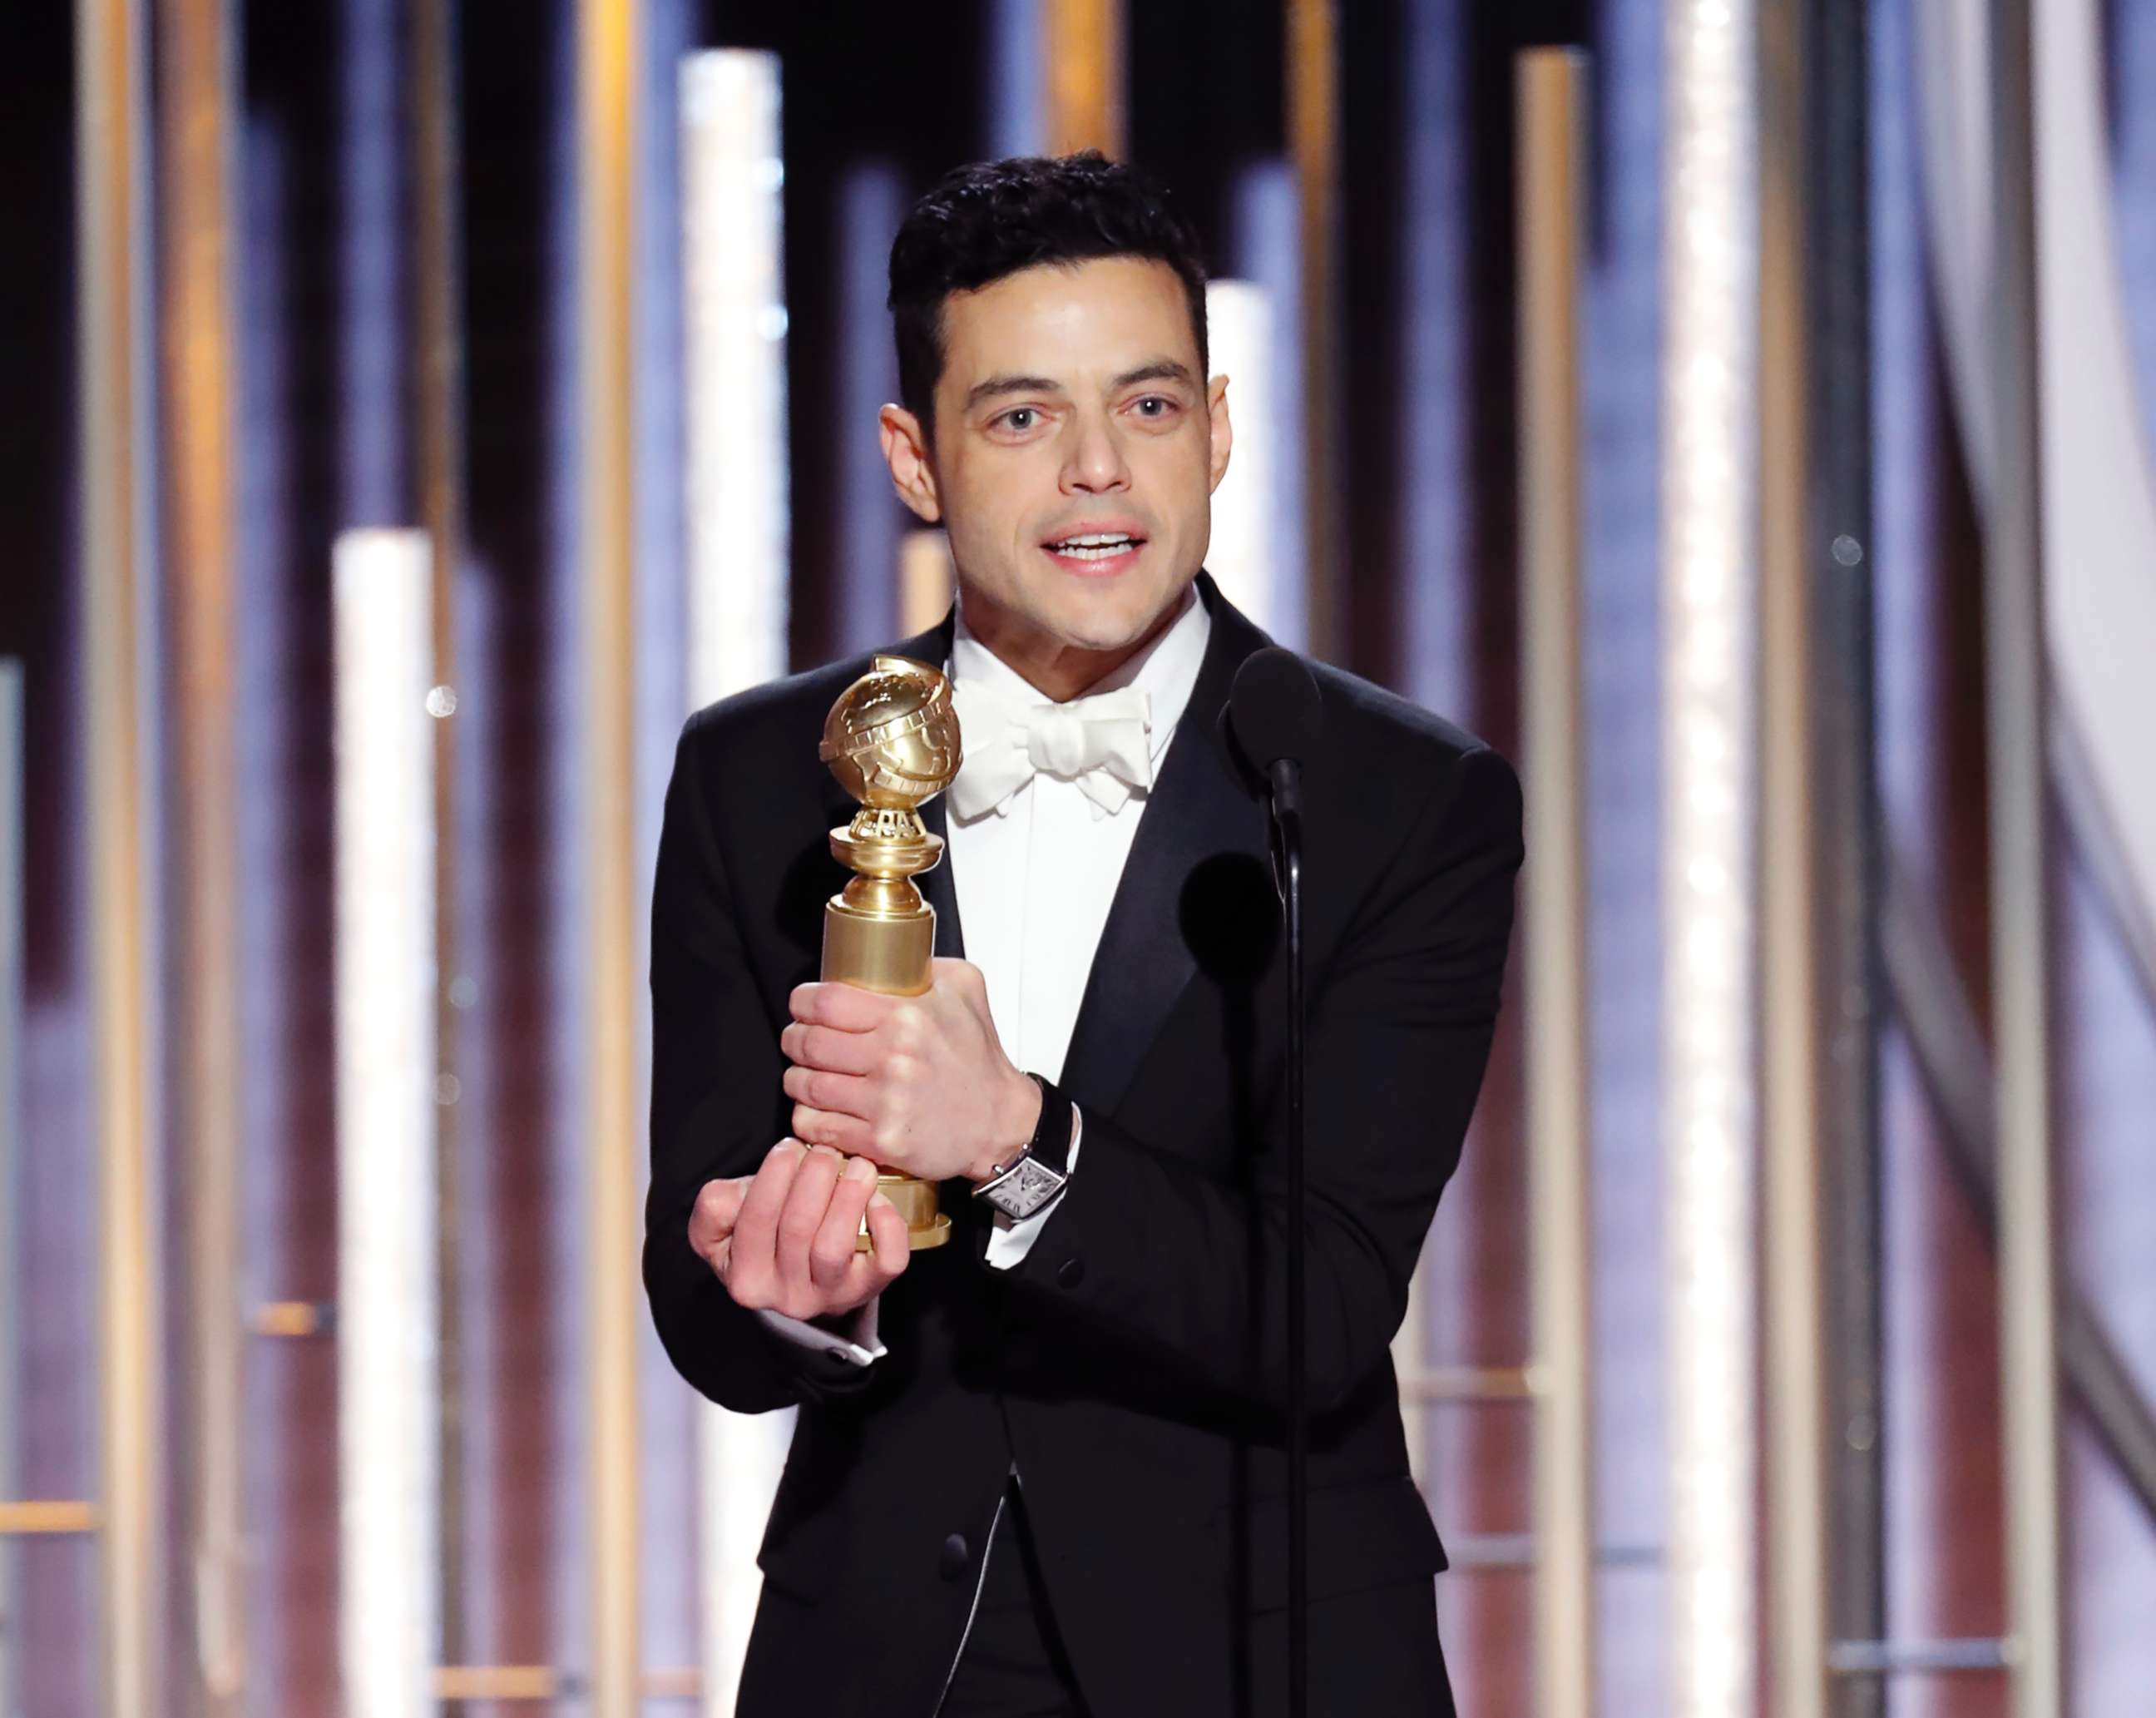 PHOTO: Rami Malek accepts the award for Best Actor in a Motion Picture Drama for his role as Freddie Mercury in "Bohemian Rhapsody" during the 76th Annual Golden Globe Awards, Jan. 6, 2019, in Beverly Hills, Calif.